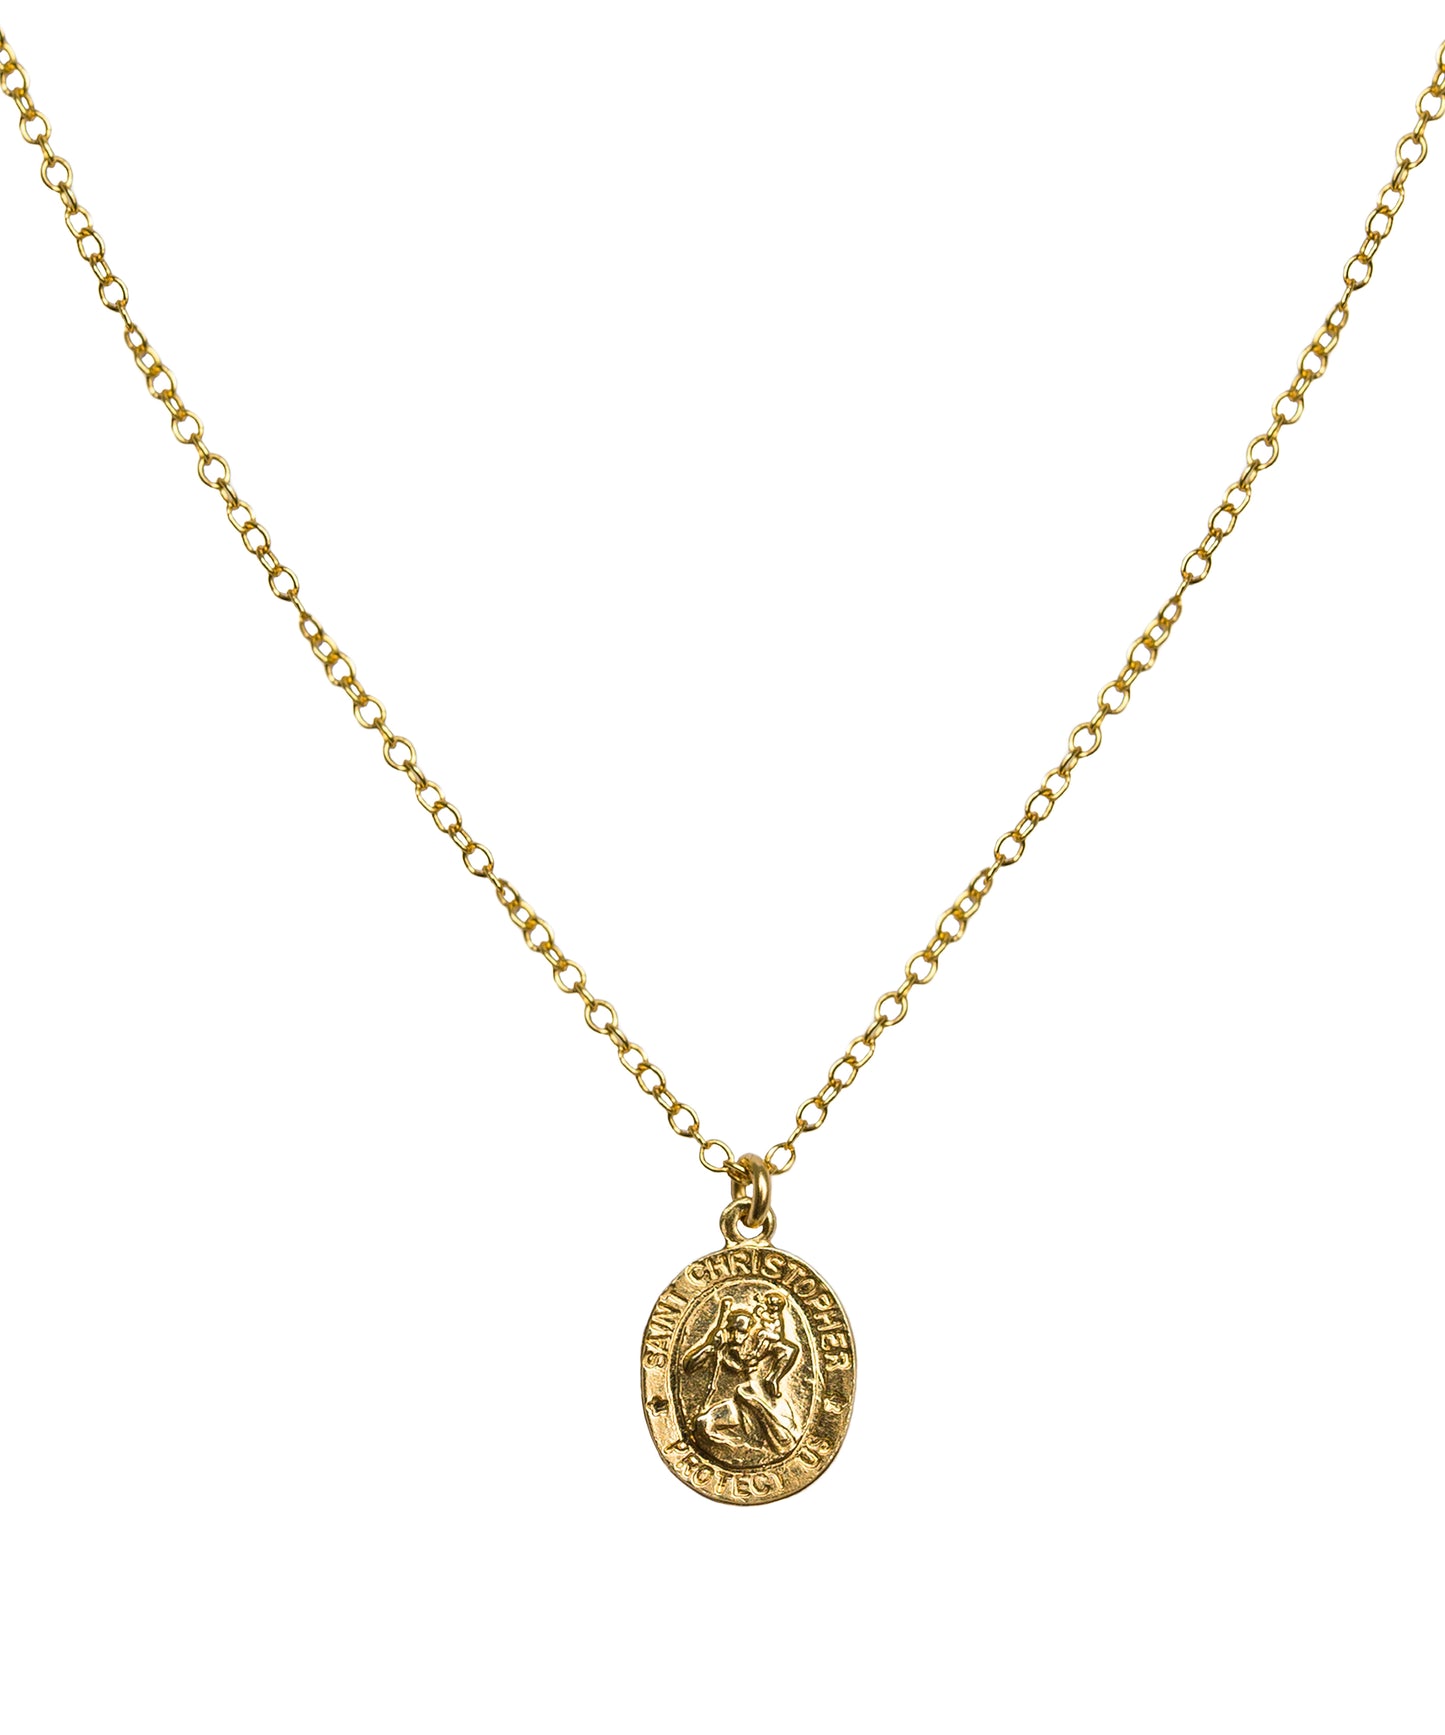 Small Saint Christopher Necklace